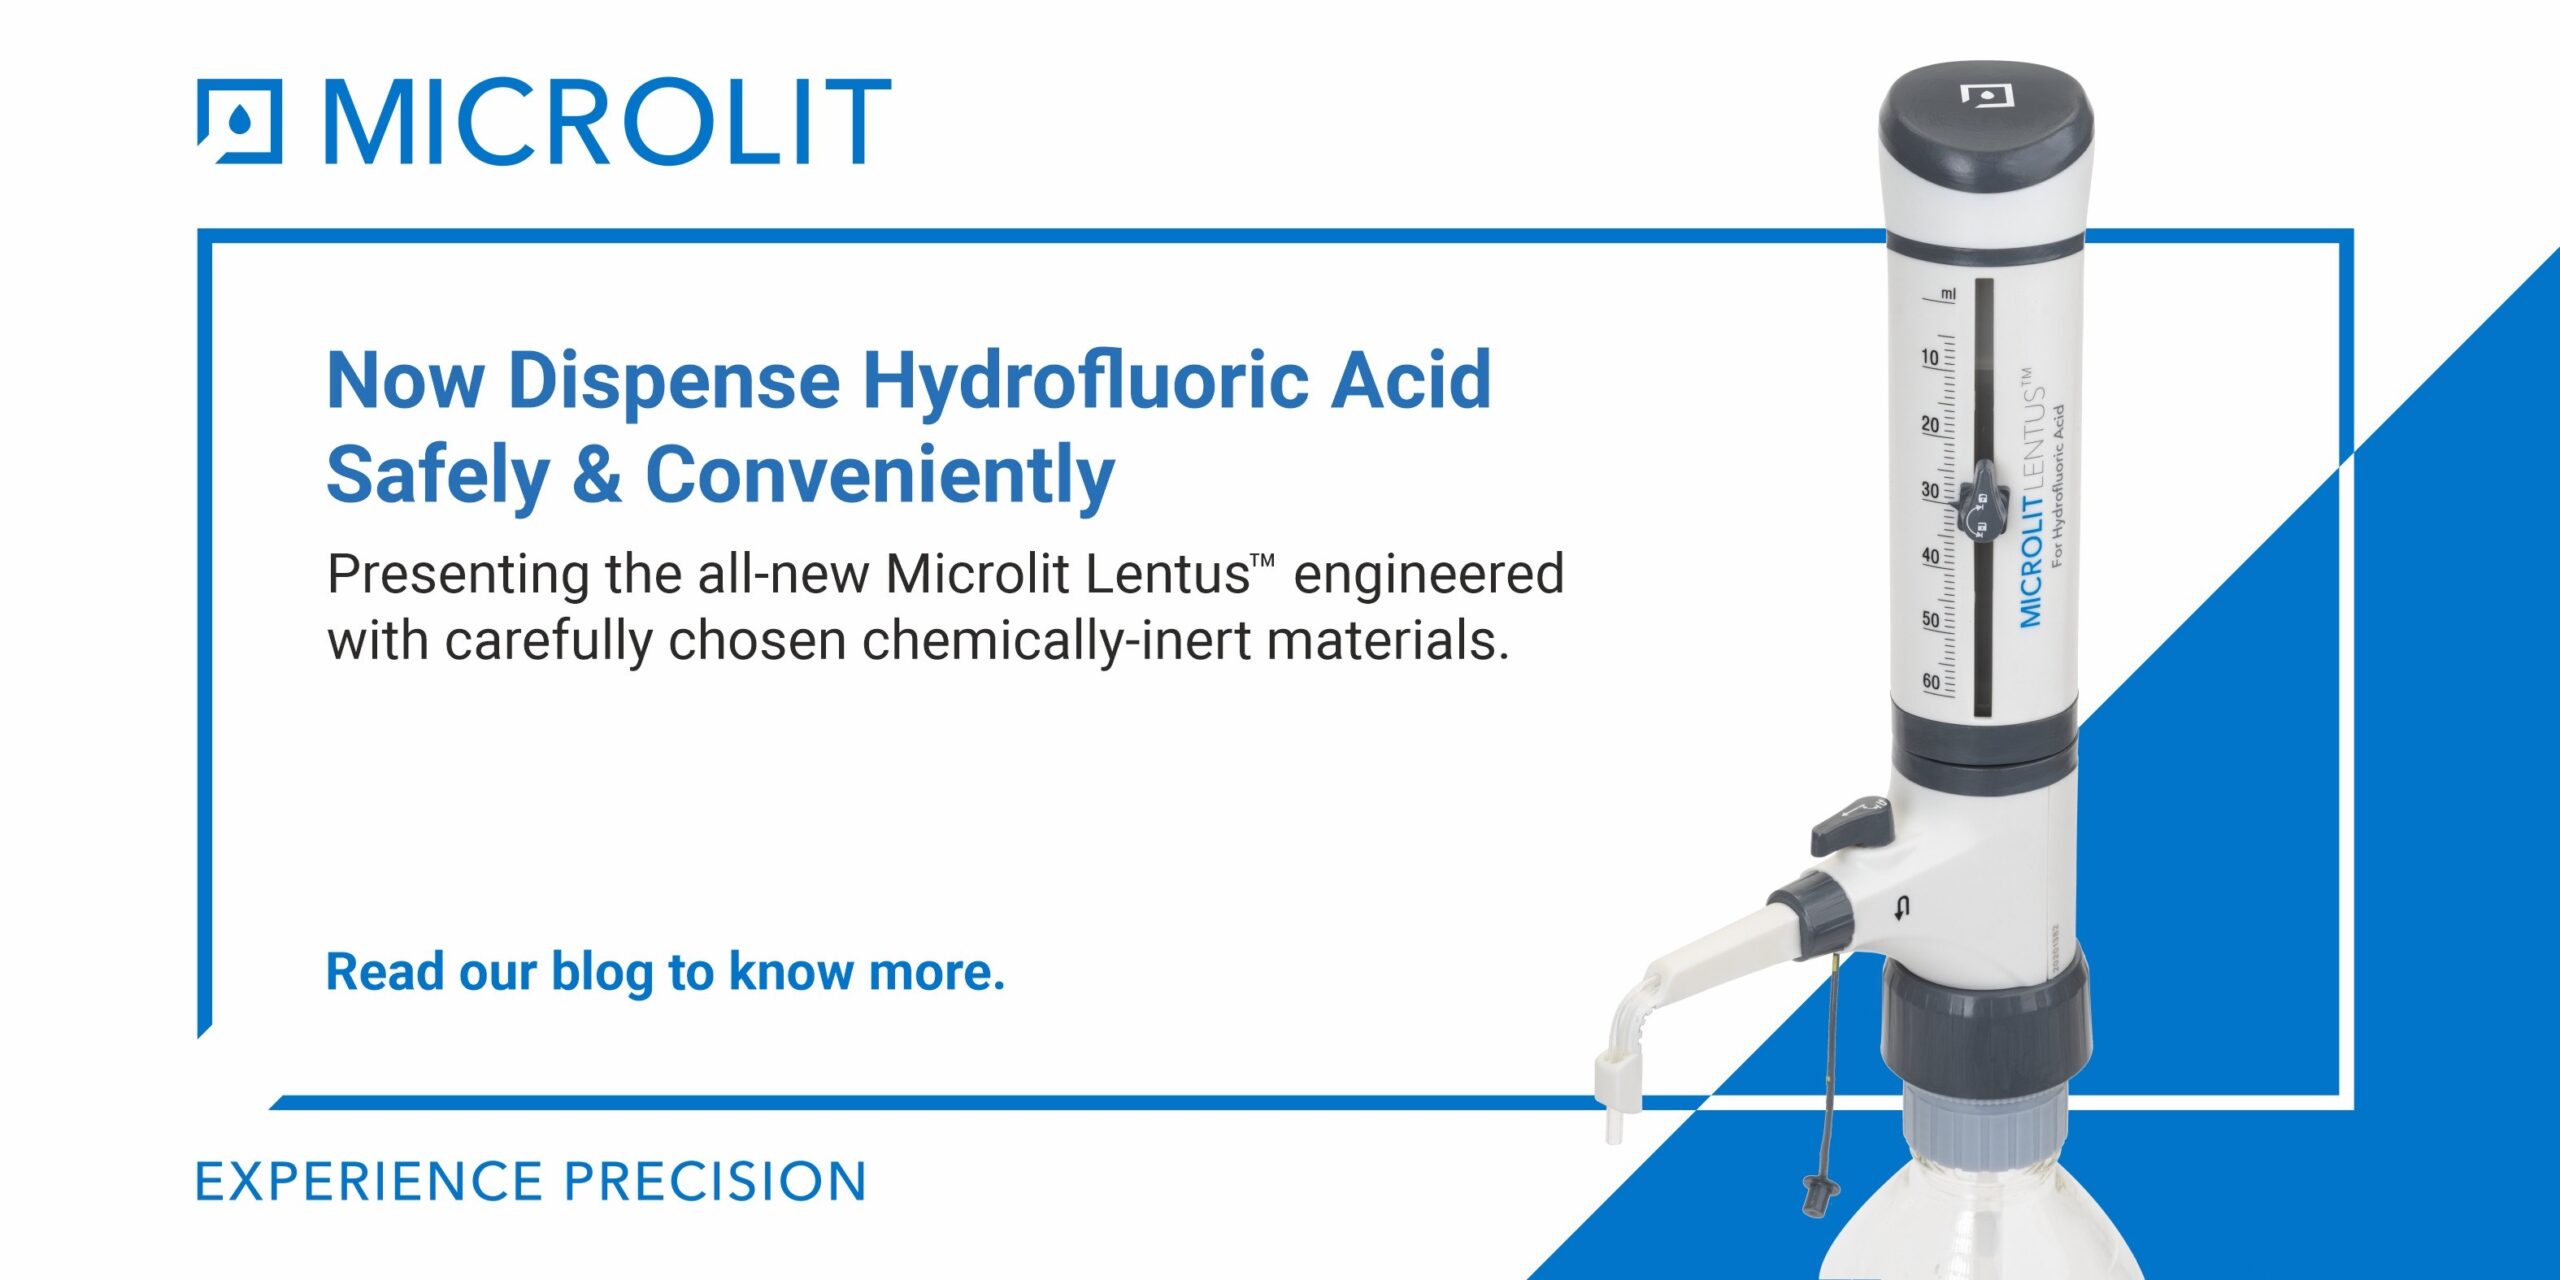 Dispense Hydrofluoric Acid Fearlessly with the New Microlit LentusTM